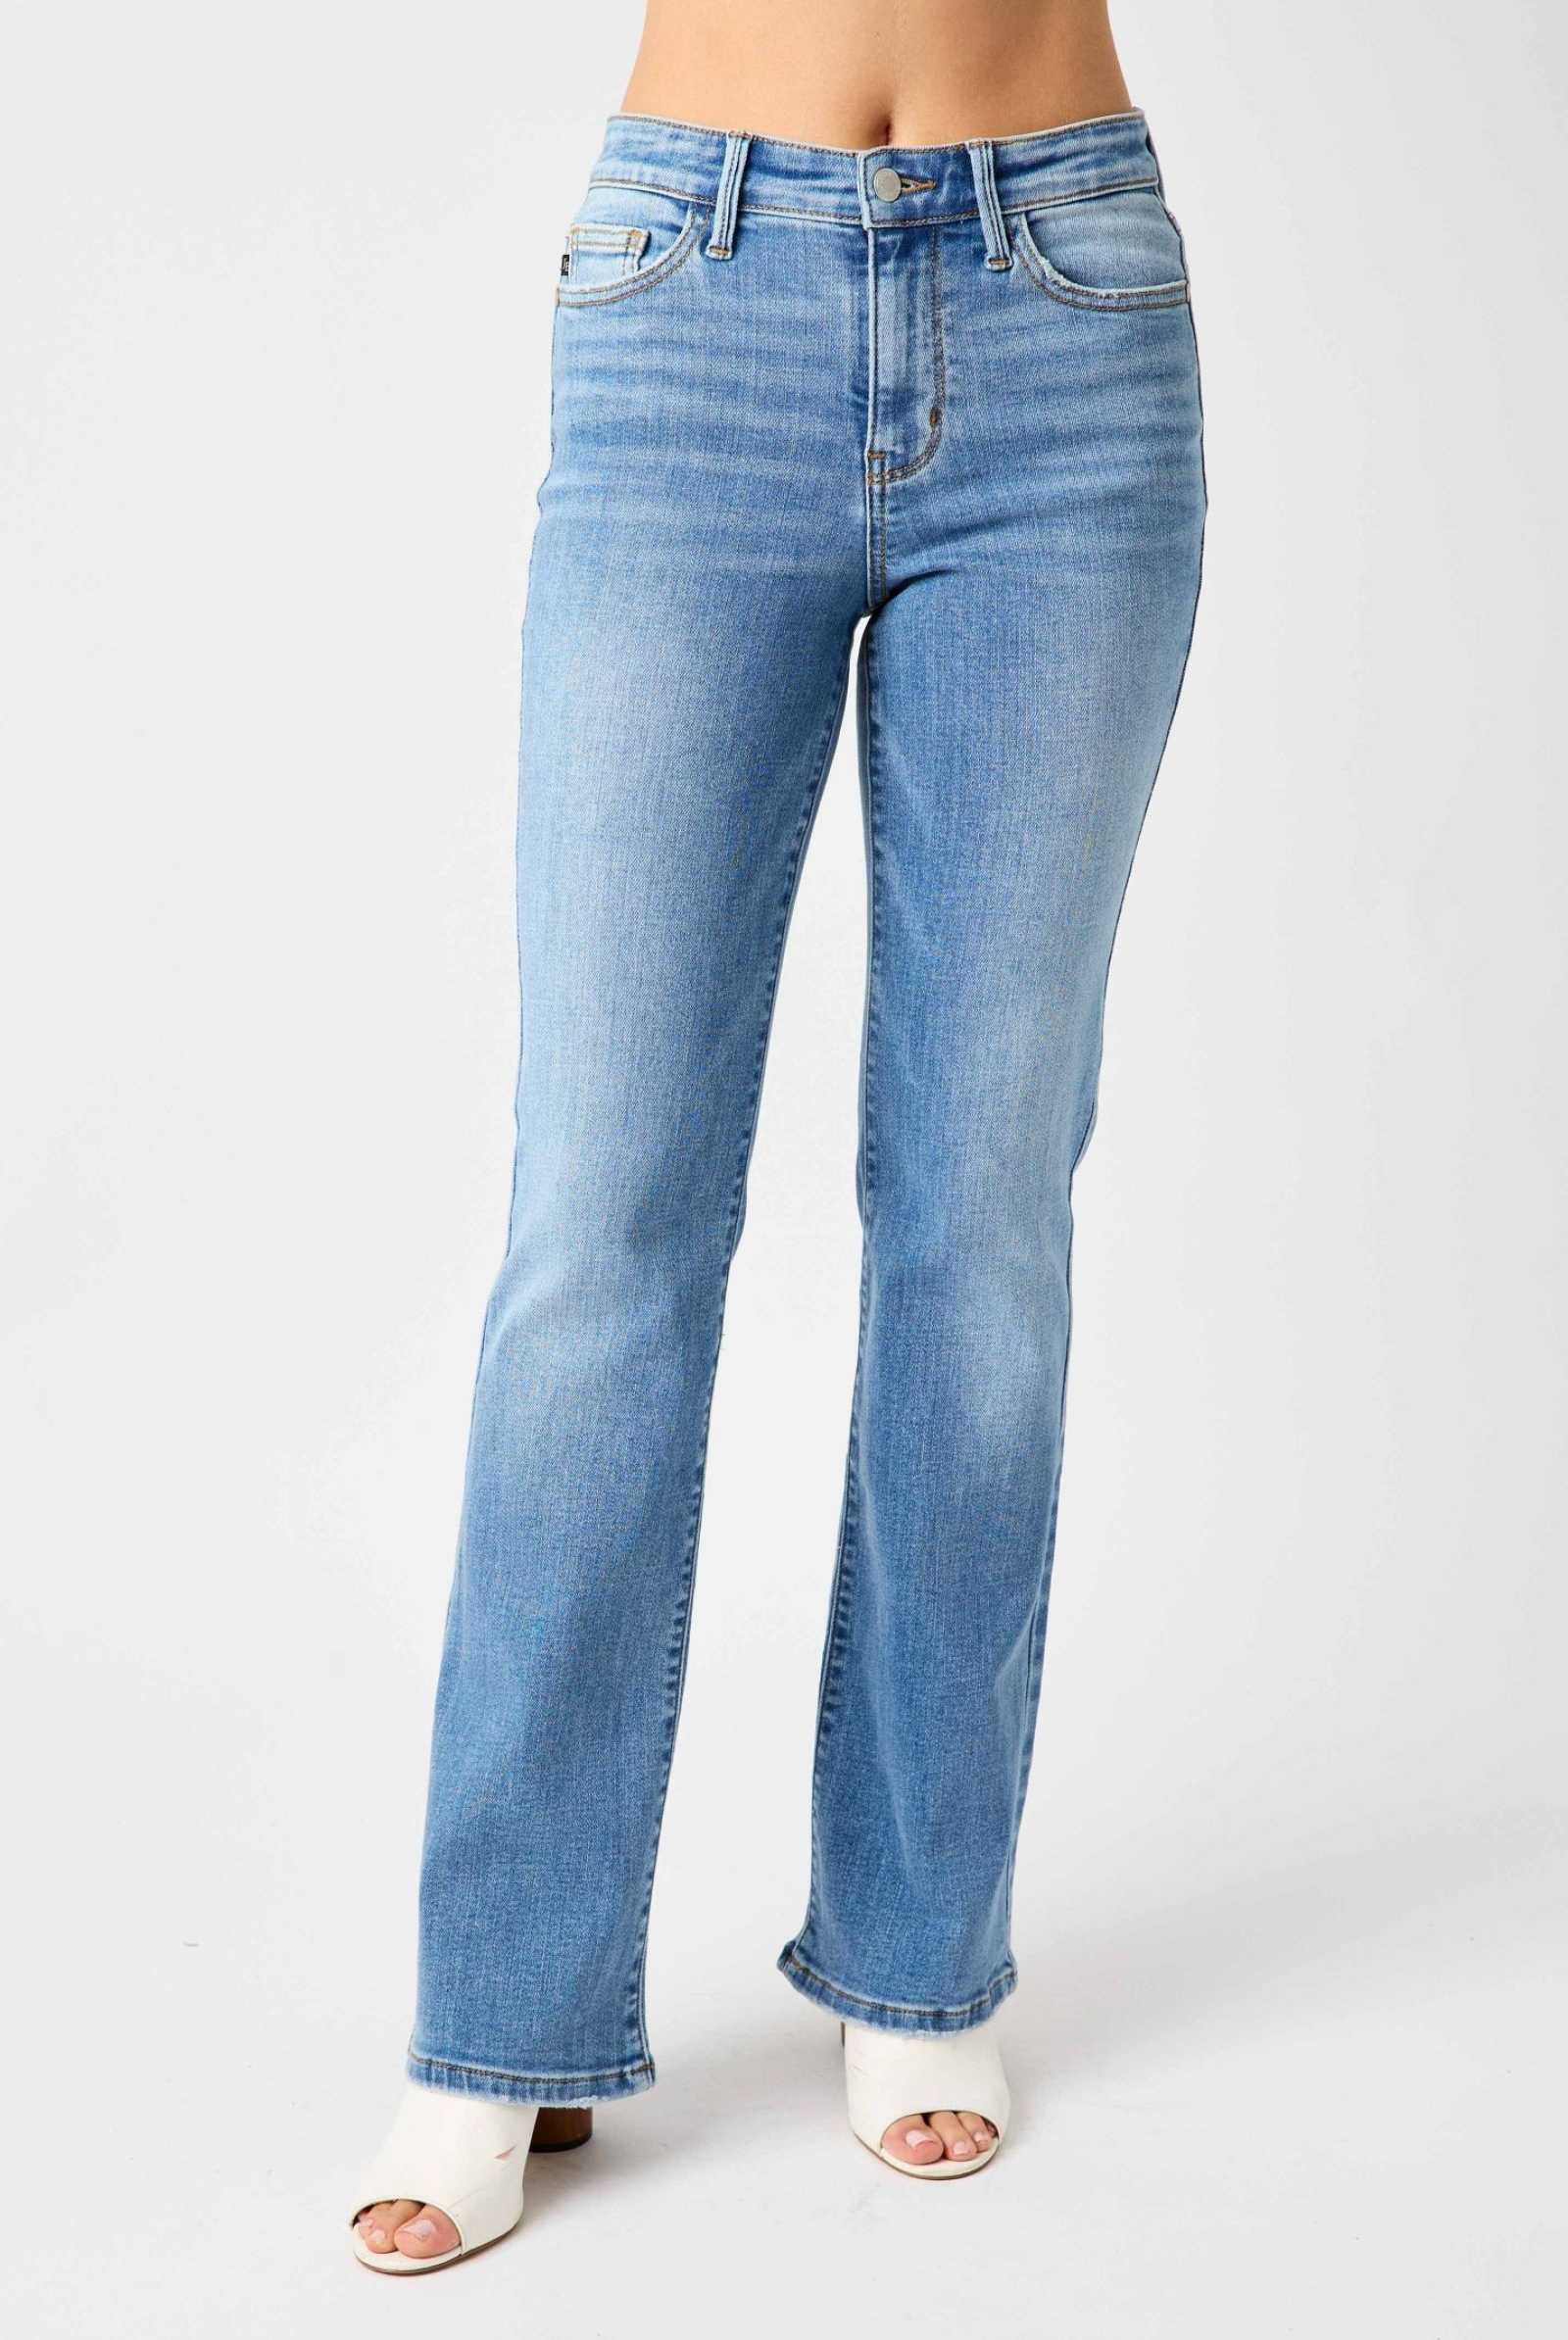 JUDY BLUE MID RISE BOOTCUT JEANS / STUFFOLOGY BOUTIQUE-Jeans-Judy Blue-Stuffology - Where Vintage Meets Modern, A Boutique for Real Women in Crosbyton, TX